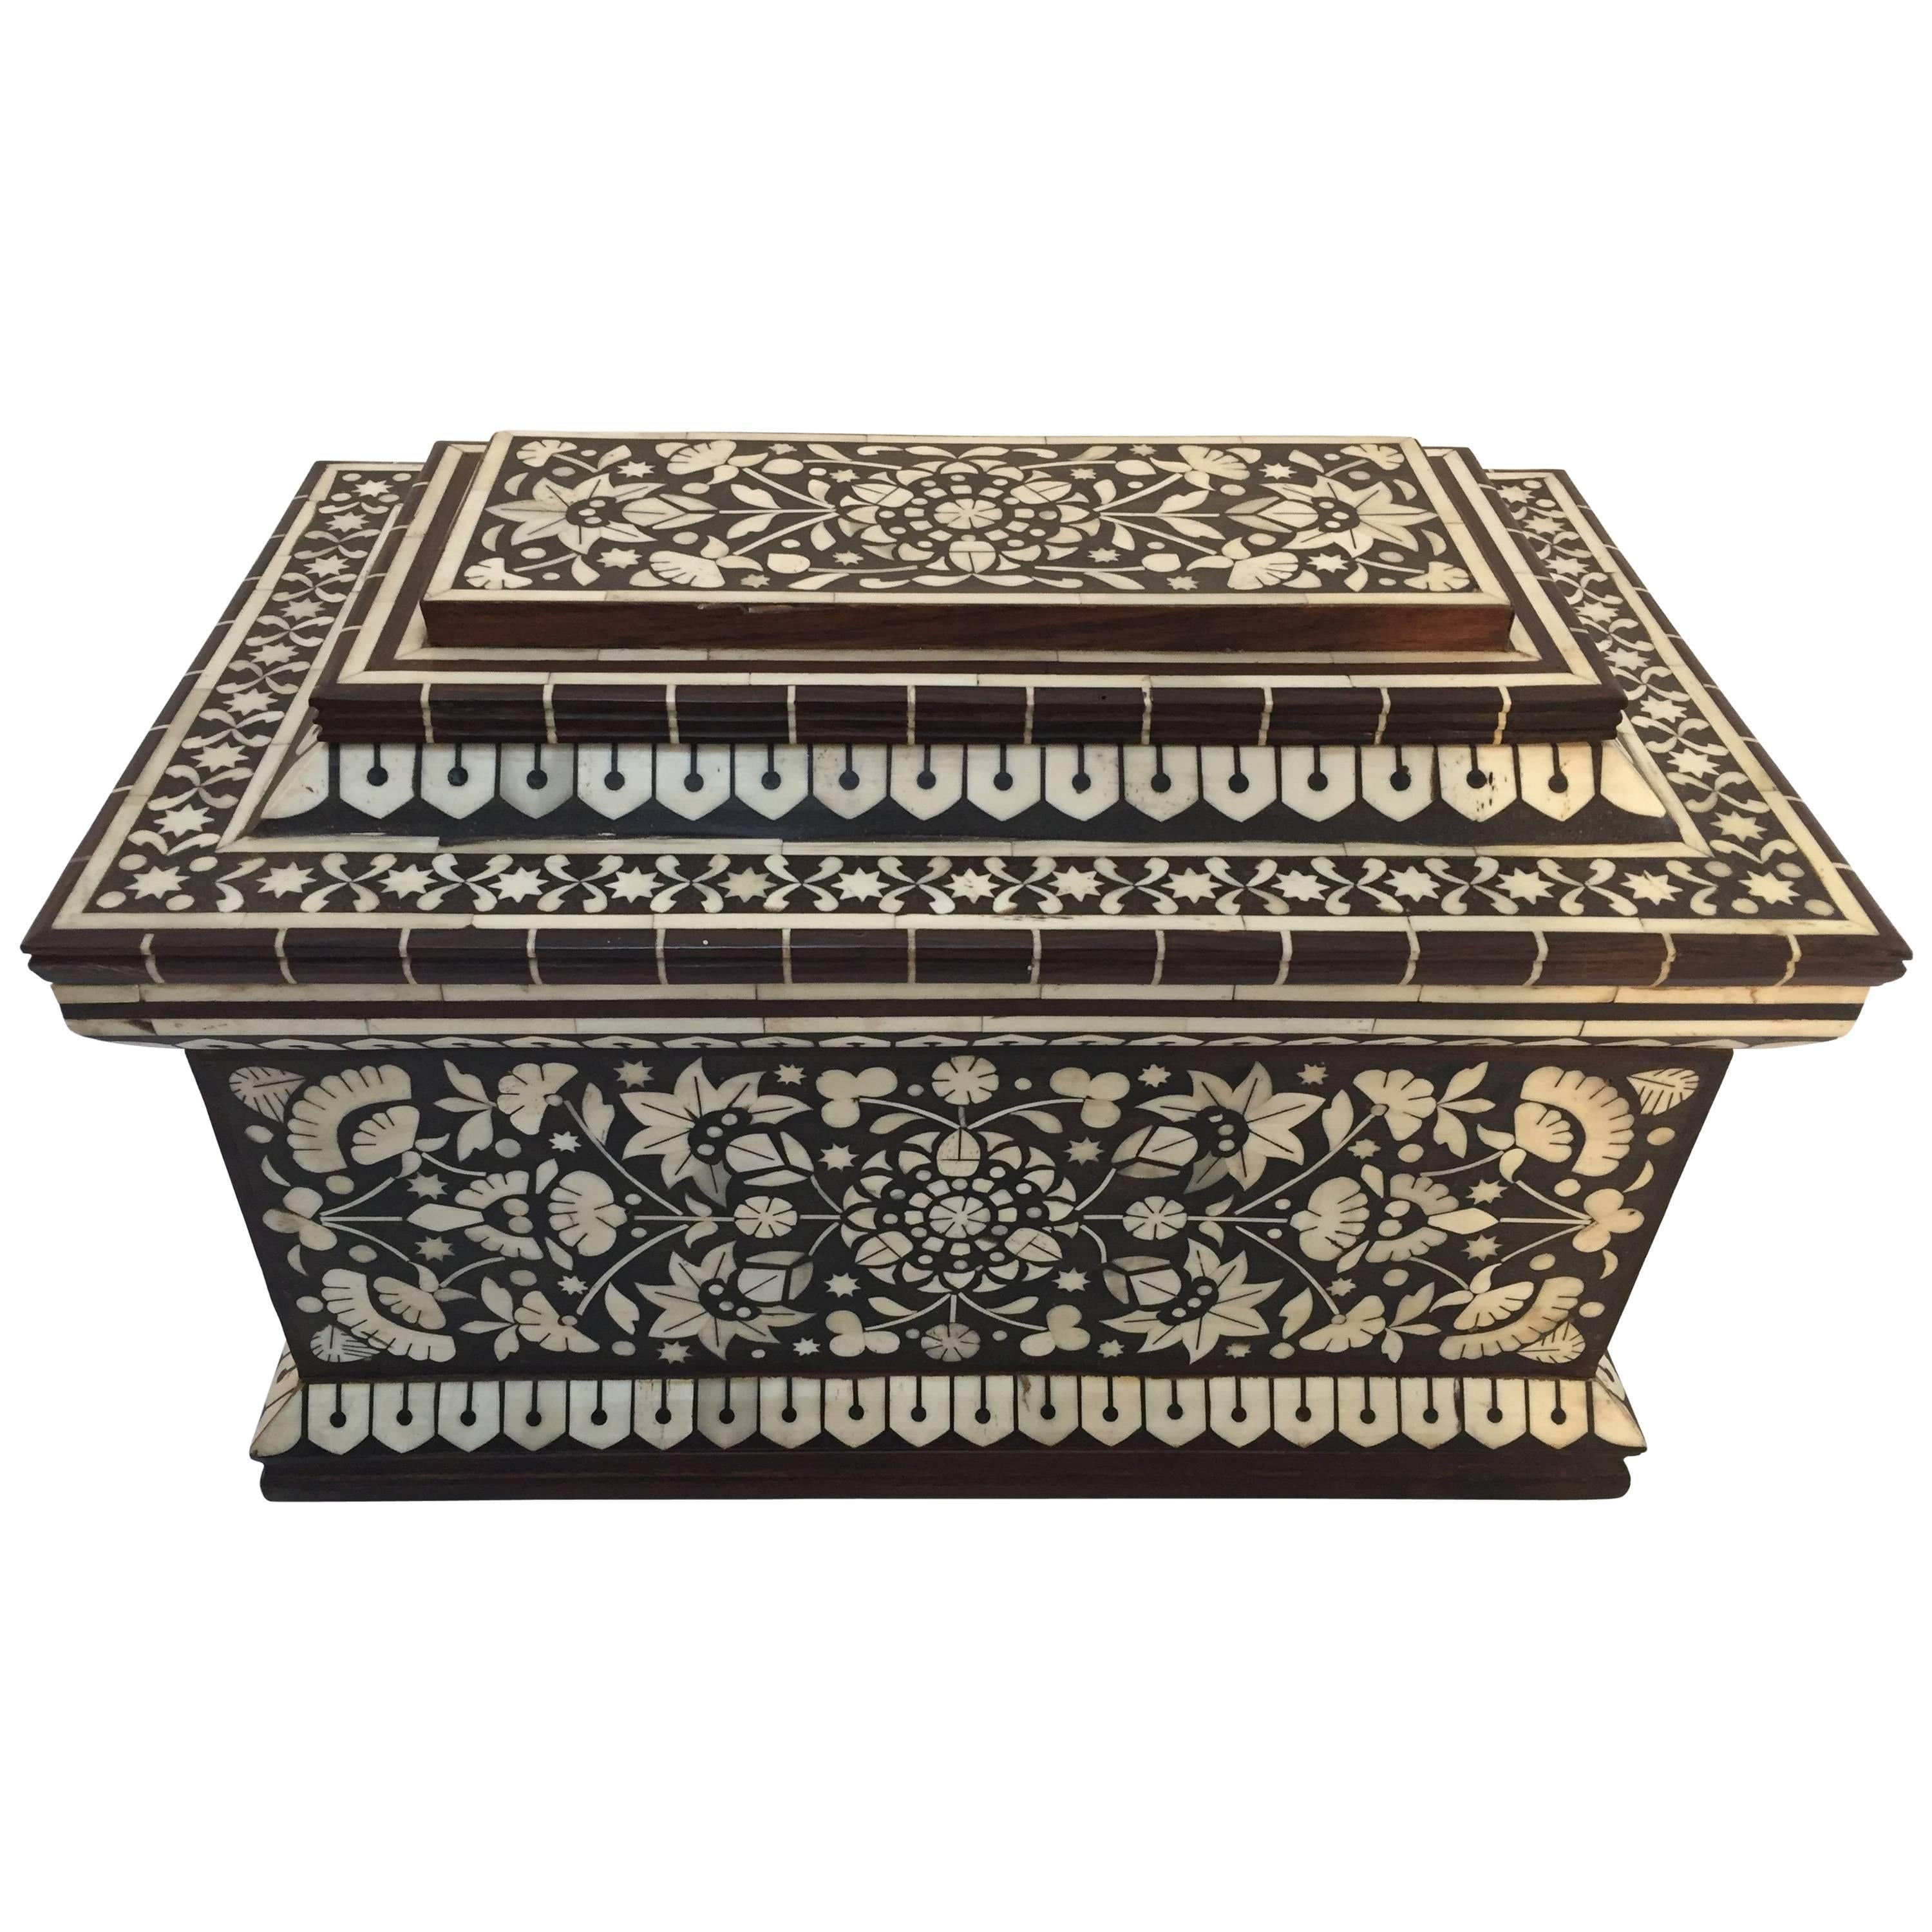 Vizagapatam Anglo-Indian Chest Tea Caddy